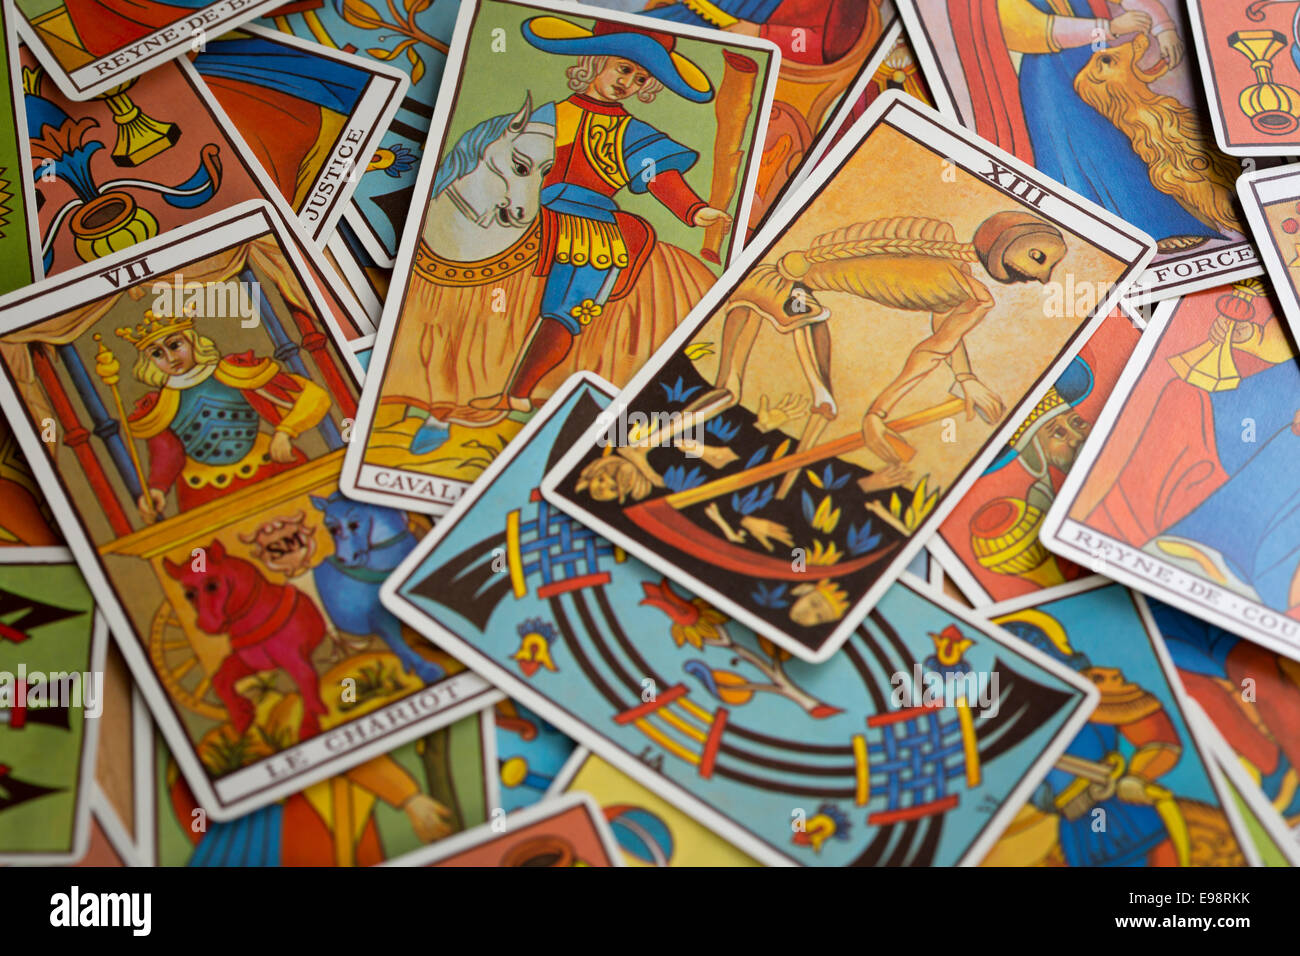 tarot cards spread out on table Stock Photo